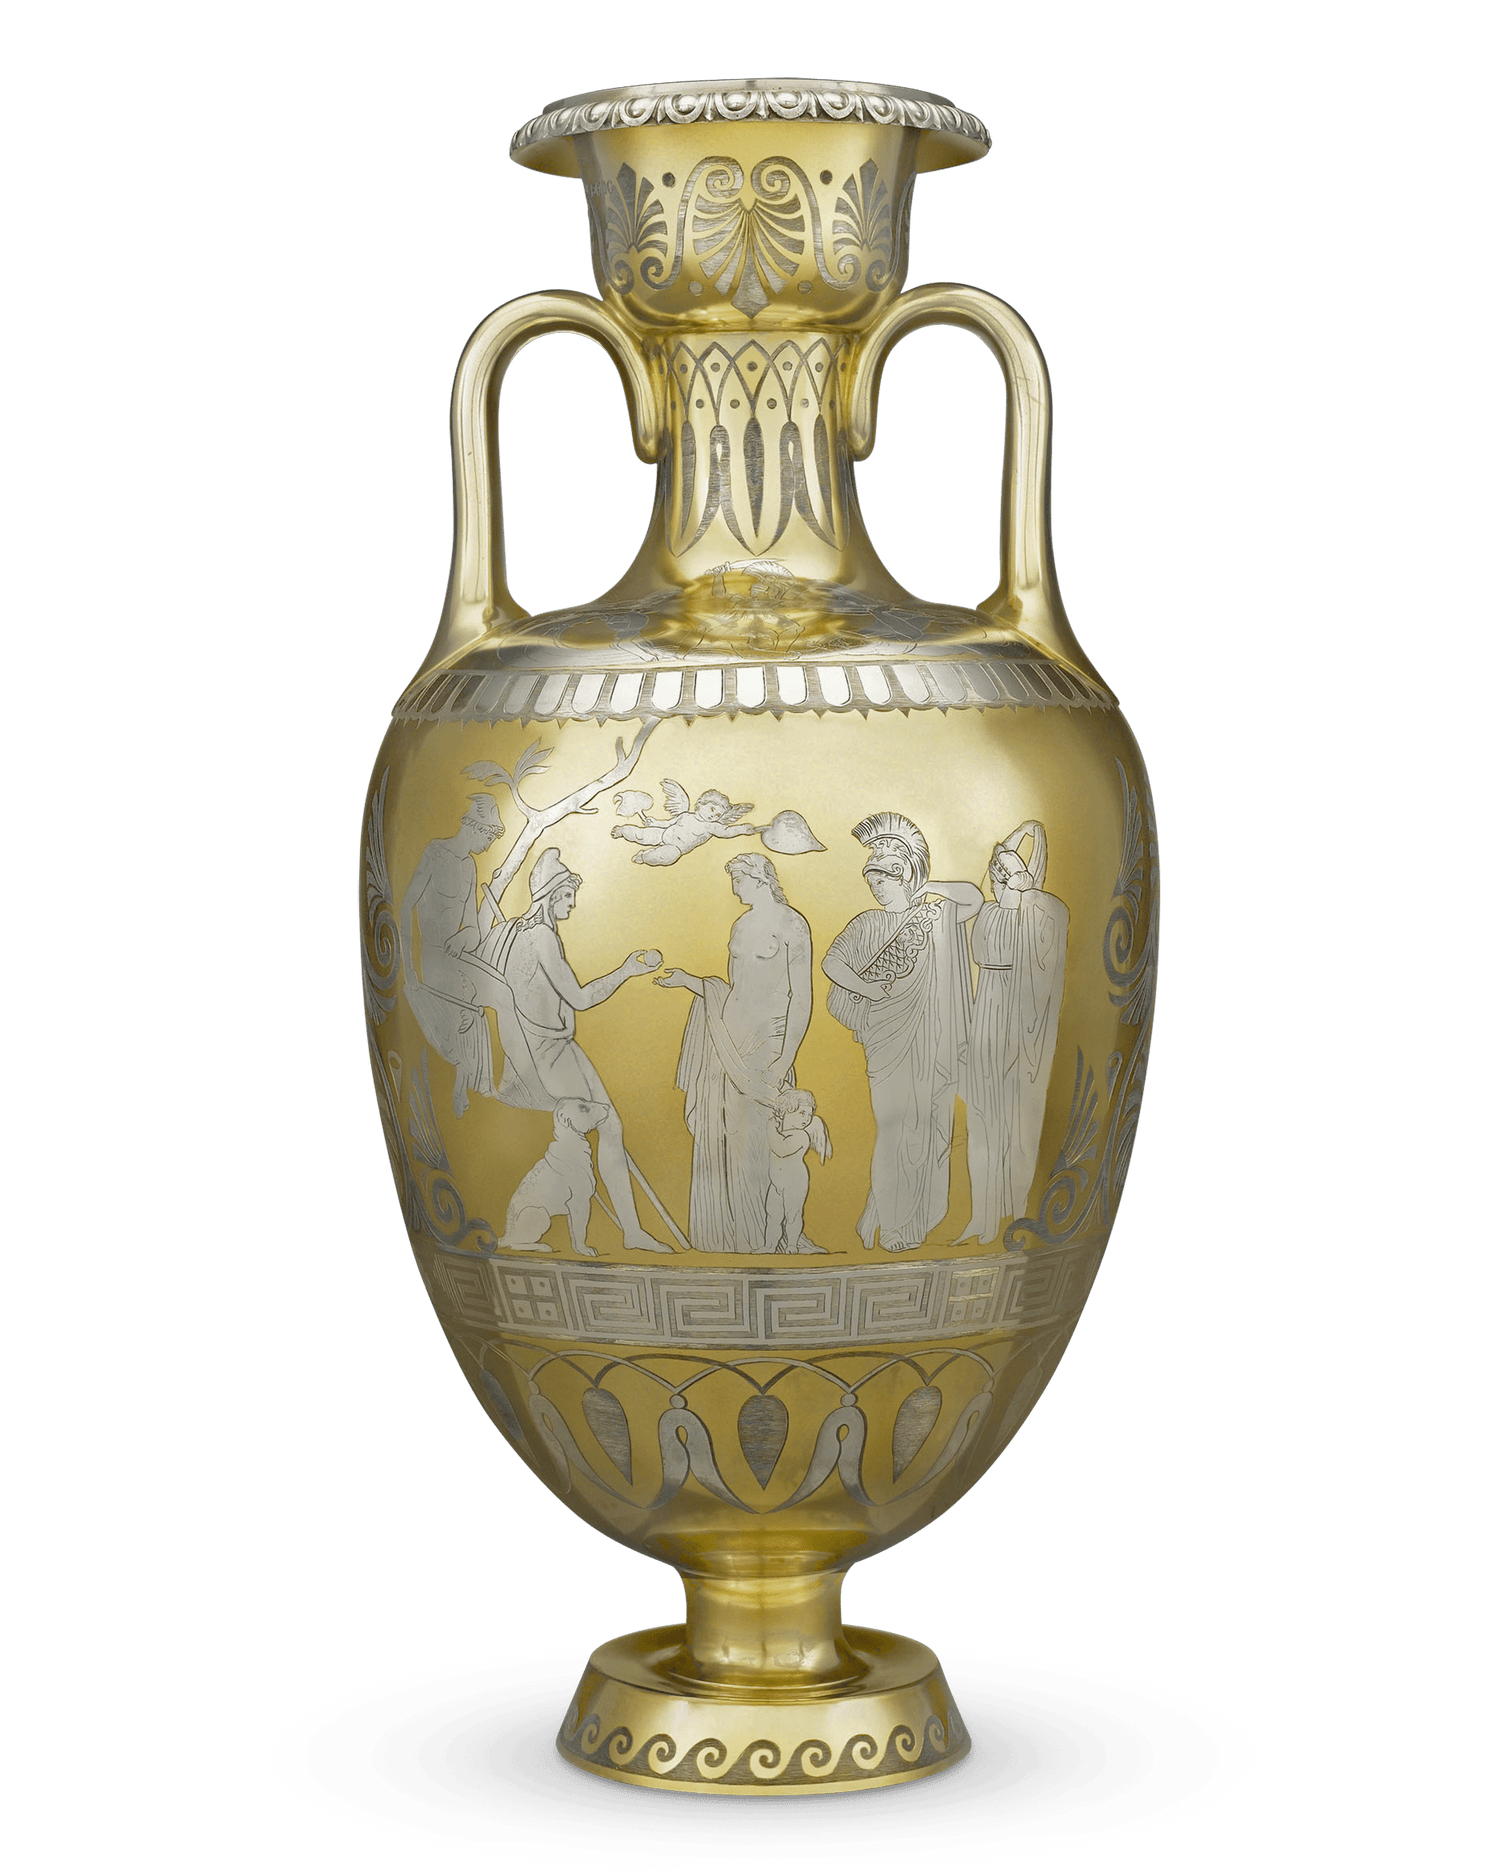 This magnificent Victorian silver urn exhibits exceptional parcel-gilding